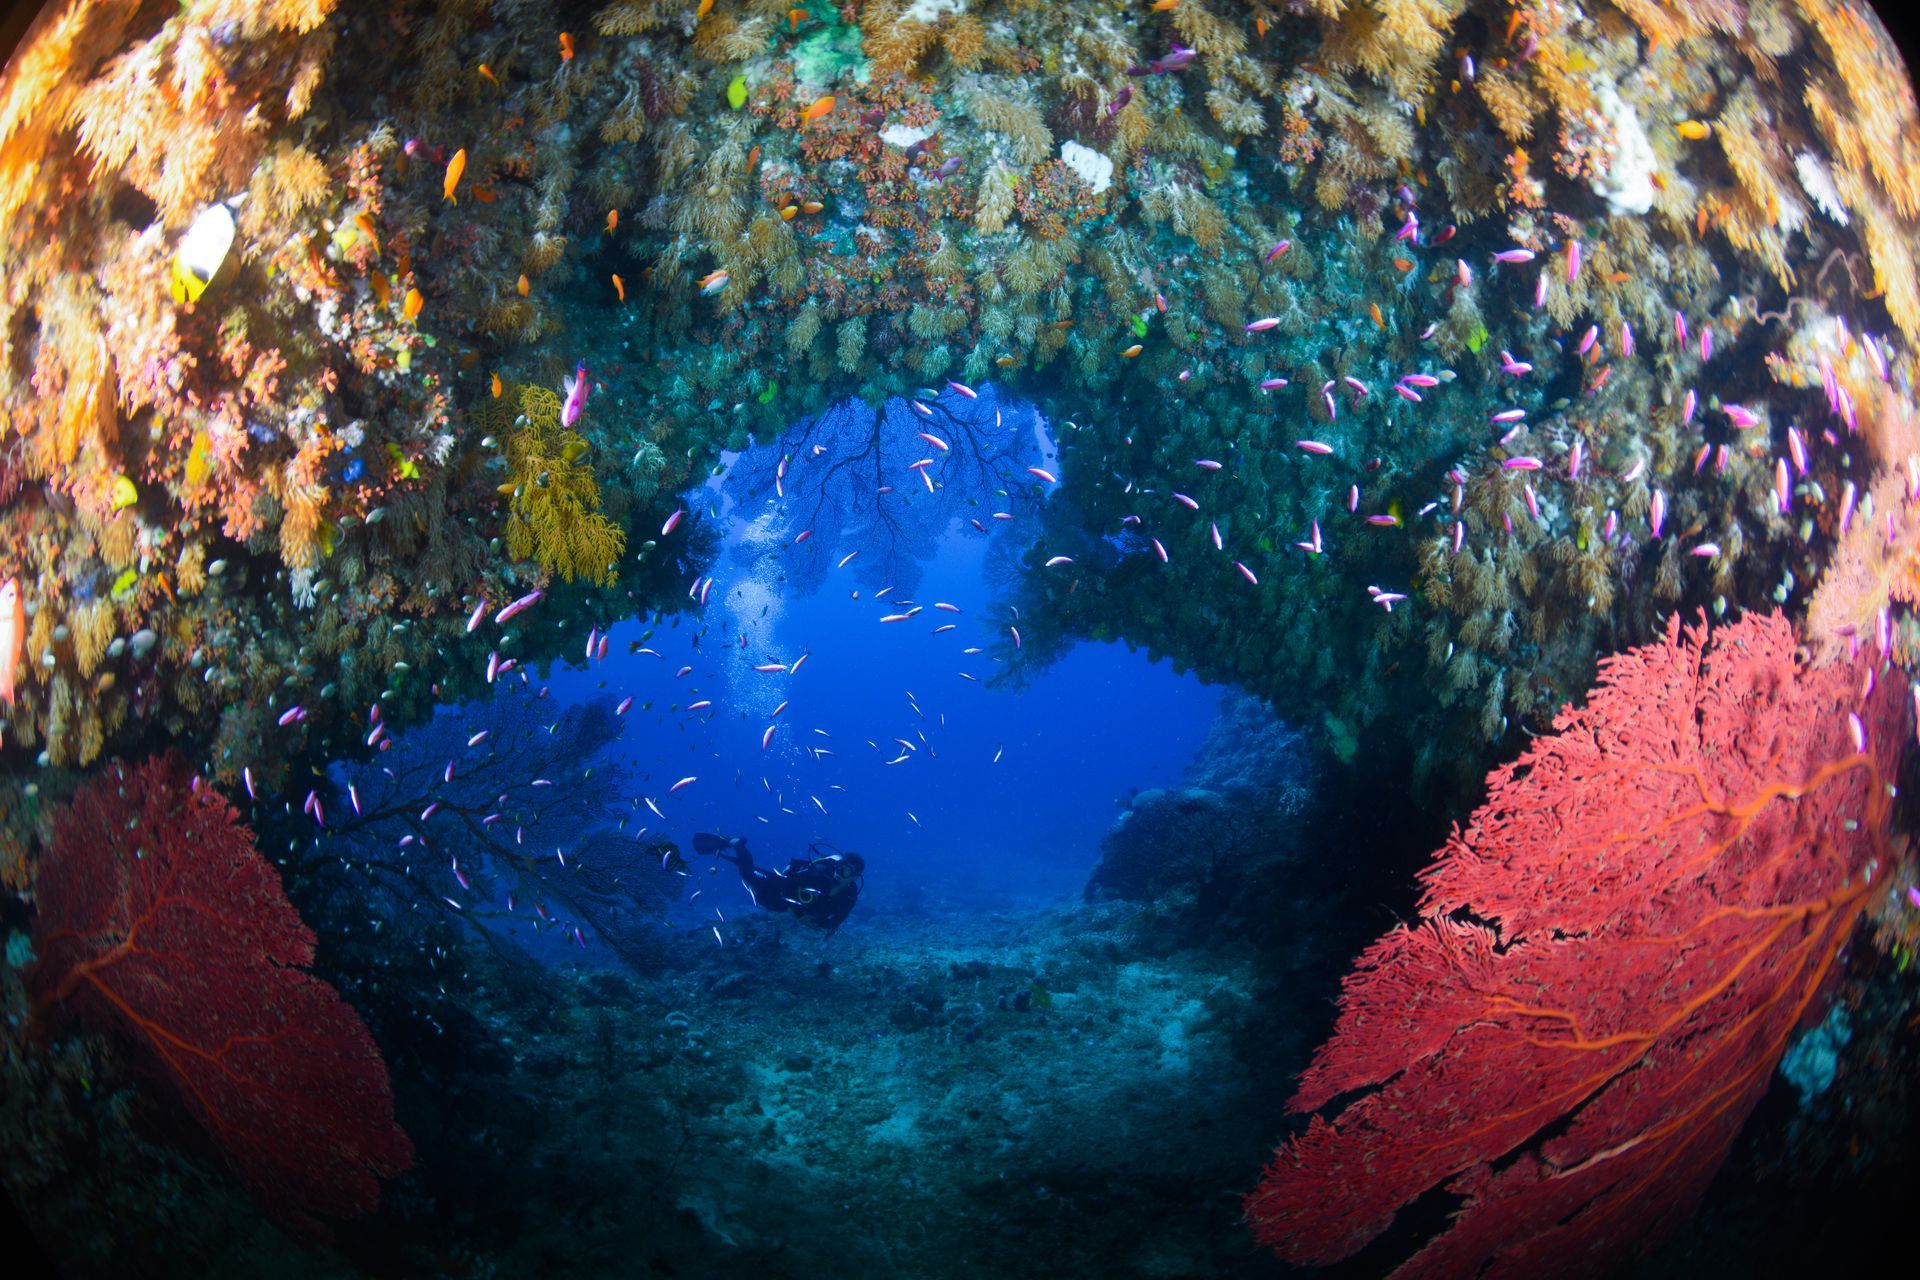 An underwater passage through a coral reef decorated with soft corals which is visited by Fiji divers in Beqa Lagoon